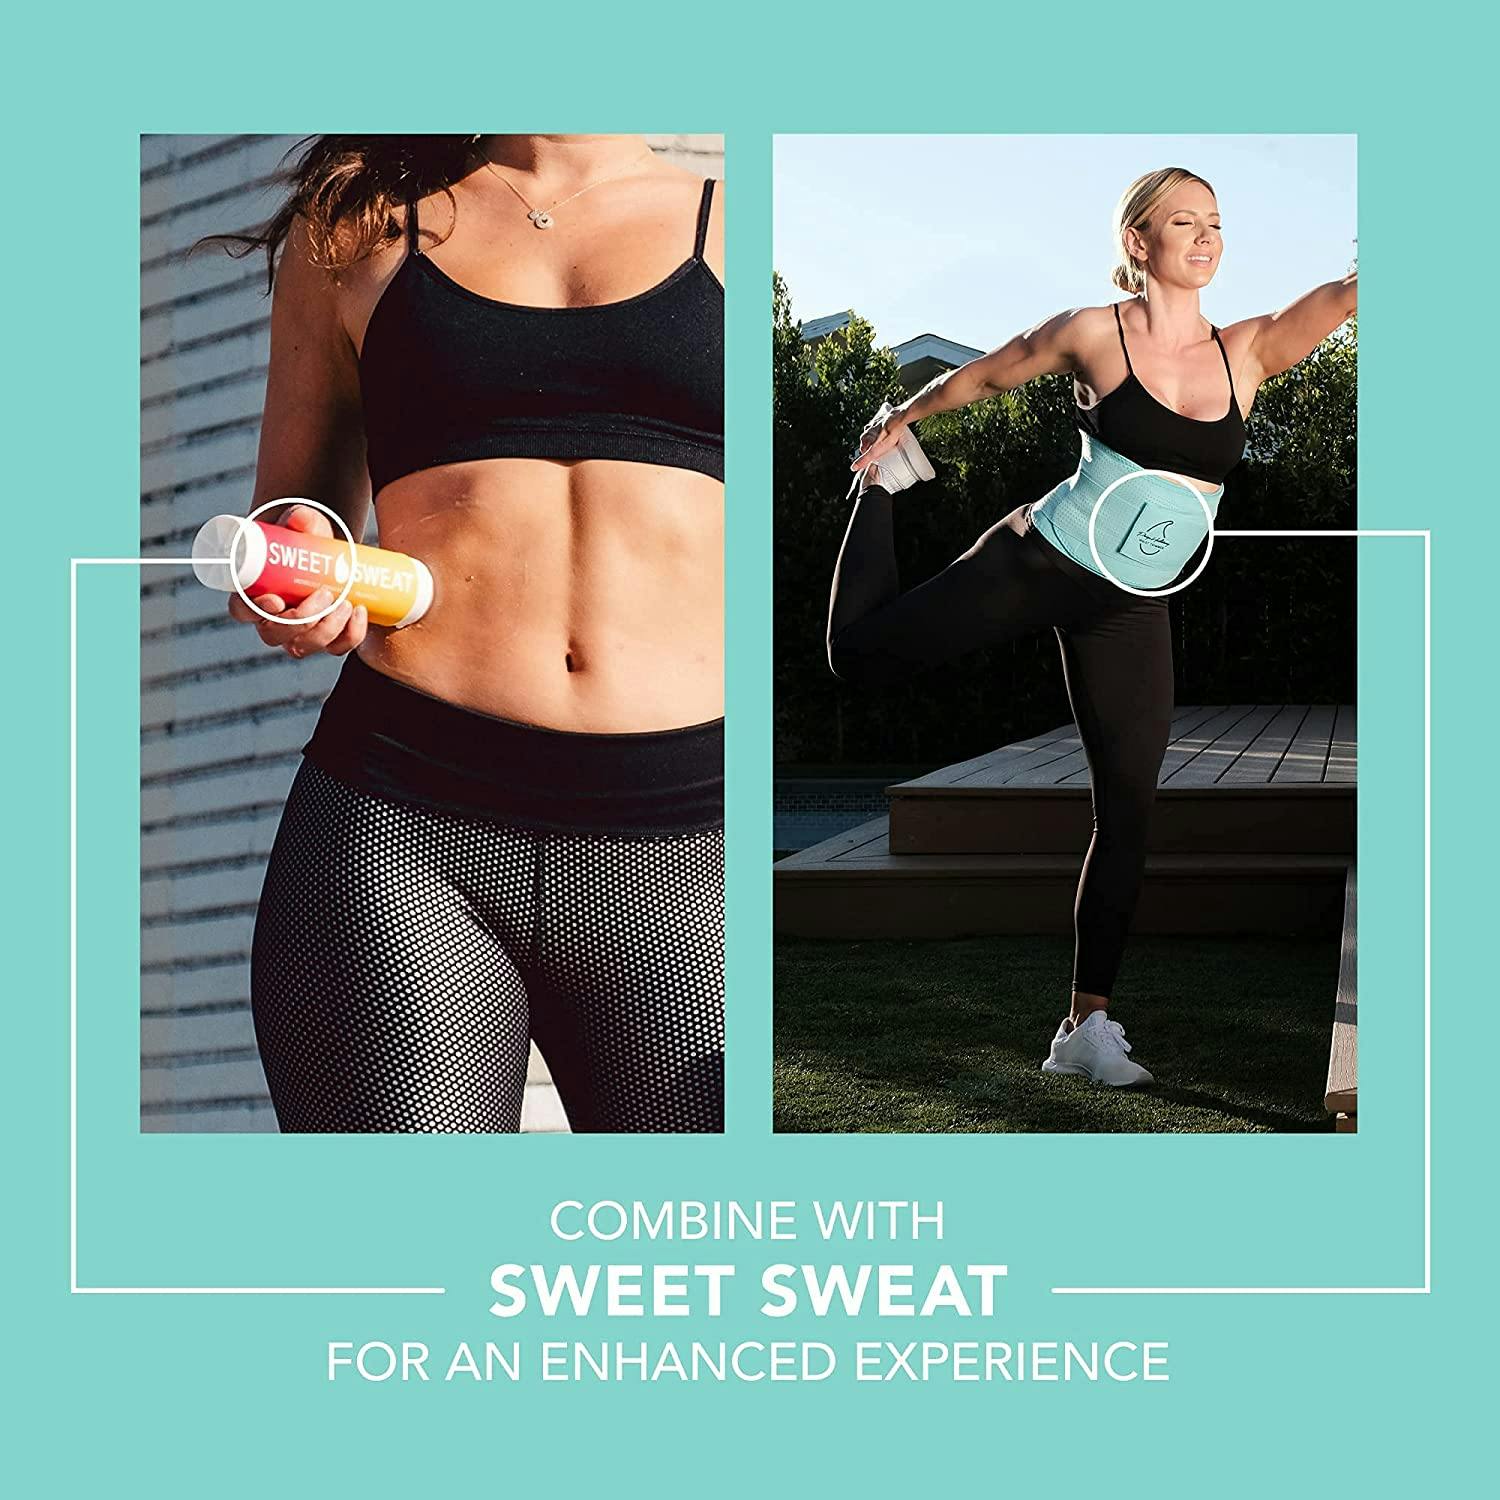 Two women, one applying Sweet Sweat® topical cream to her abdomen, and the second stretching while wearing a Sweet Sweat® Paige Hathaway waist trimmer.